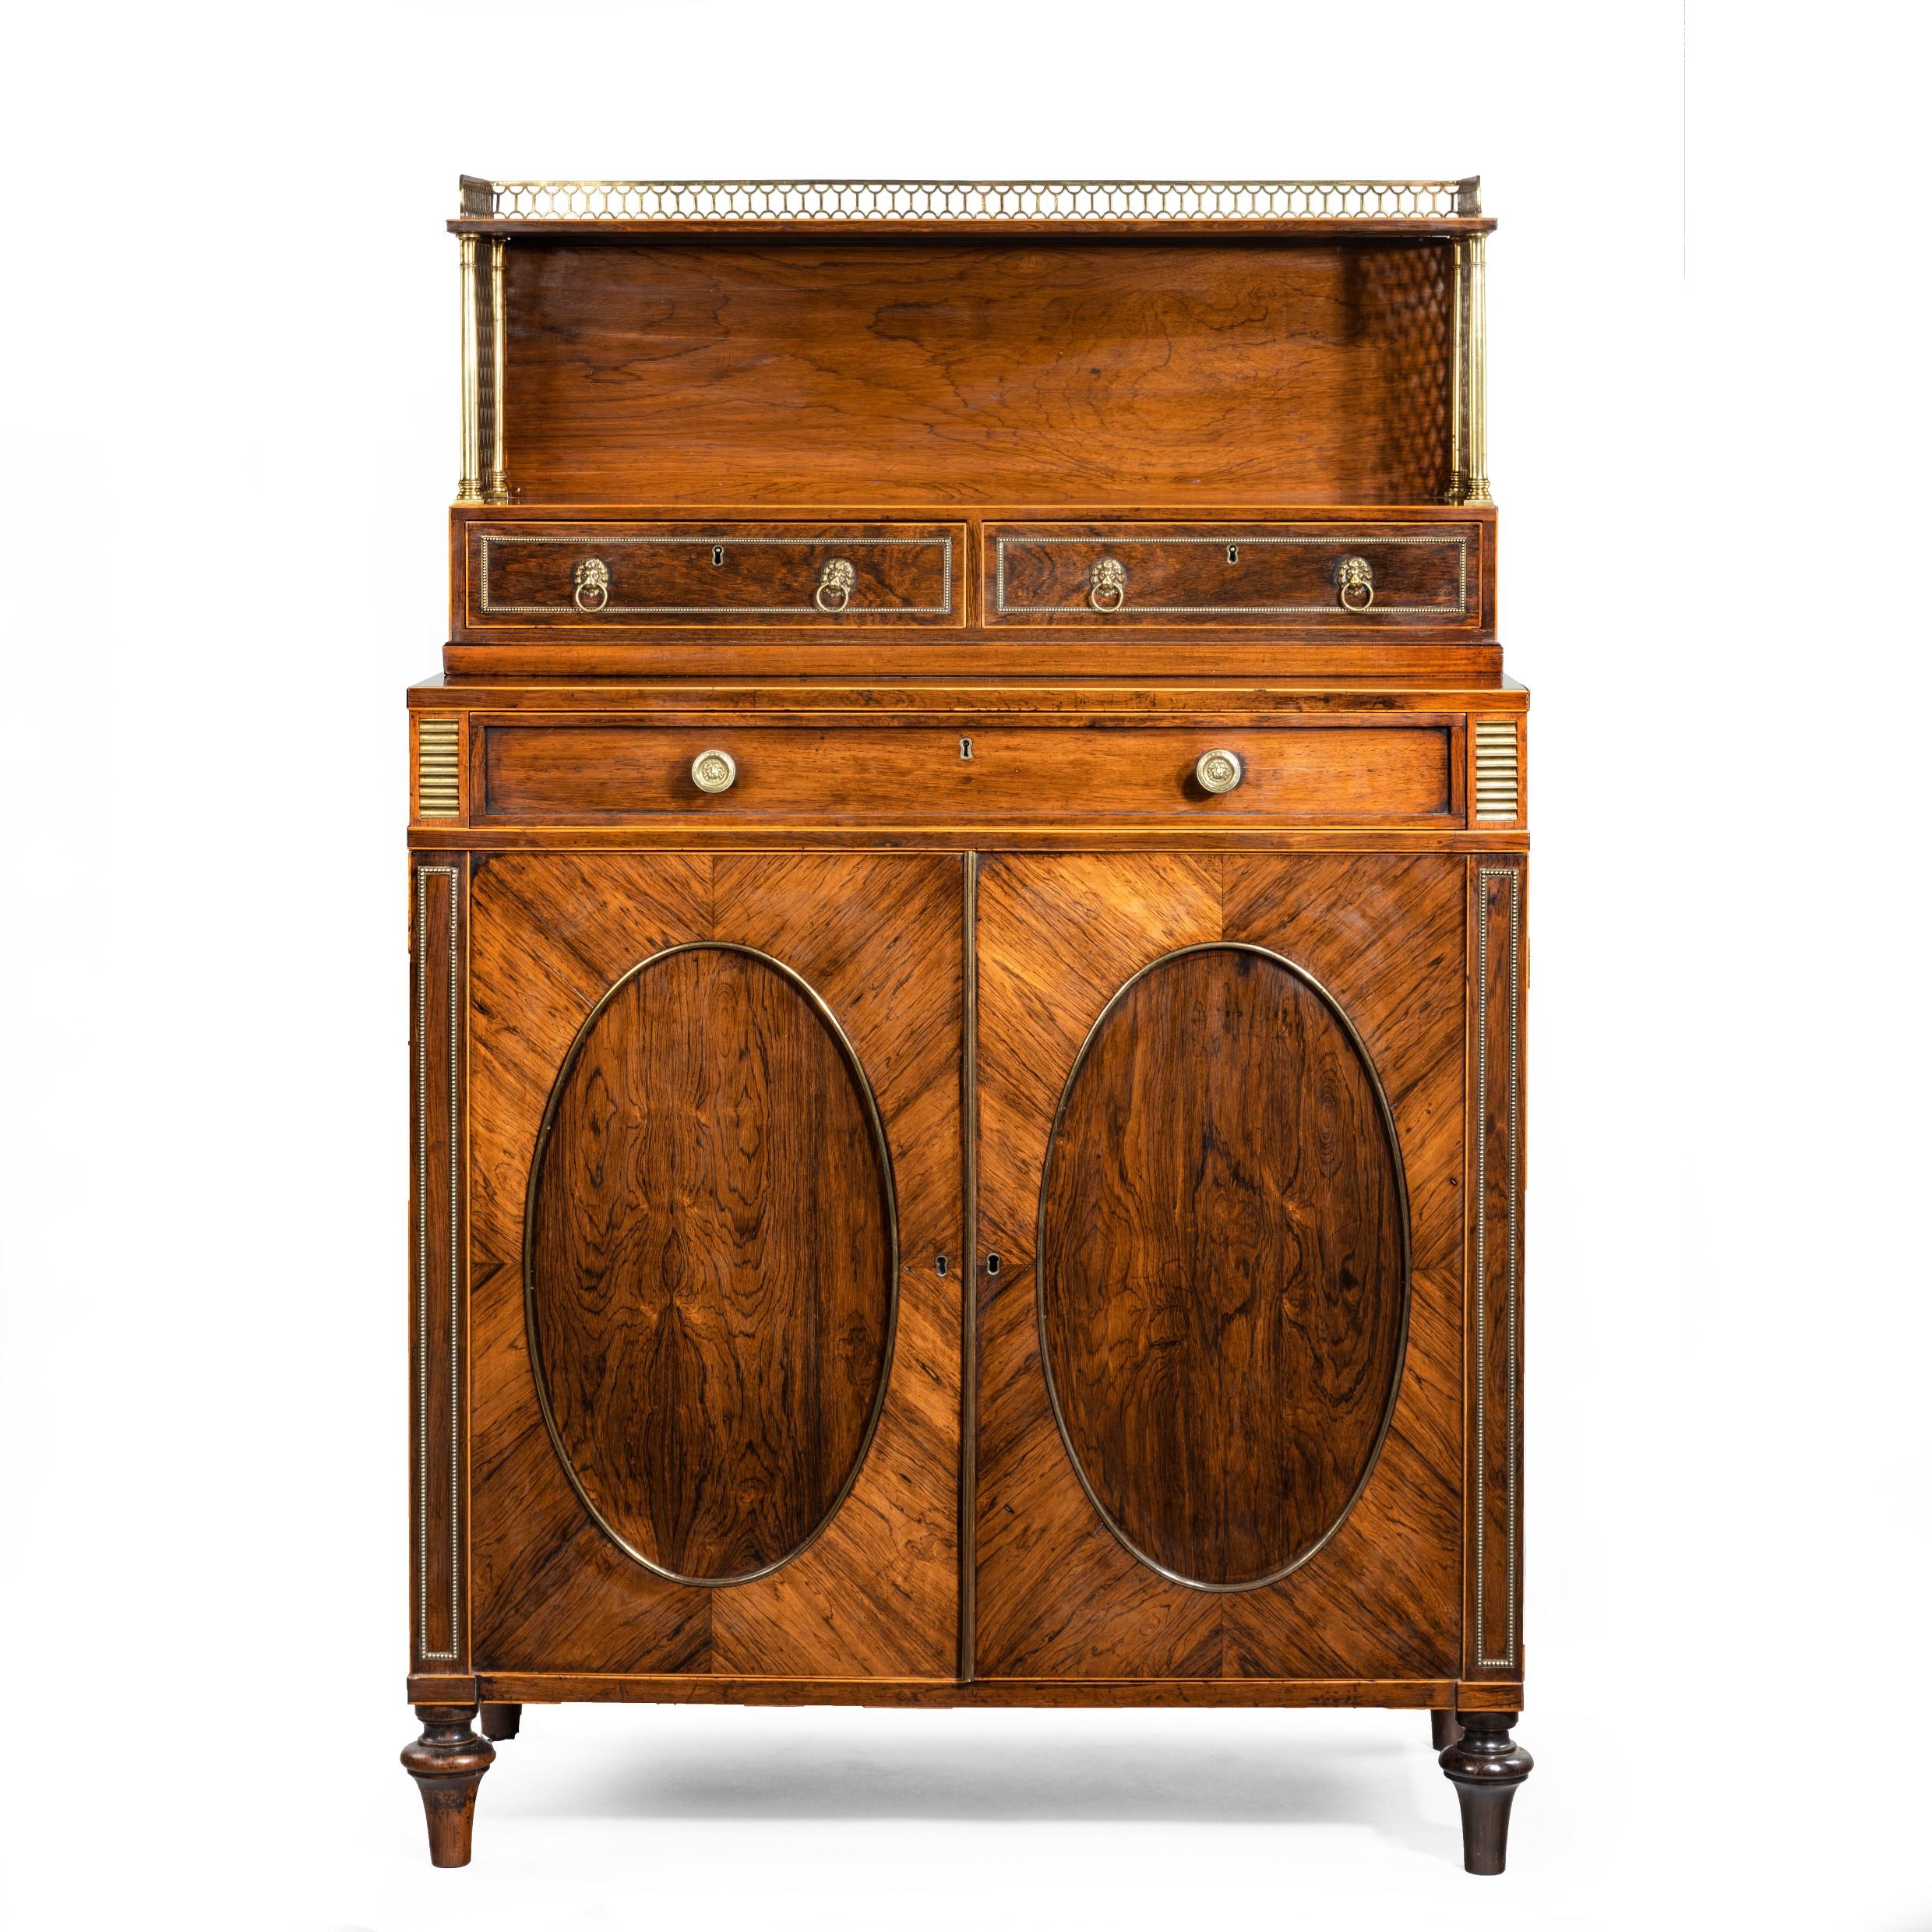 A fine high Regency rosewood two-door side cabinet, attributed to John Mclean, of upright rectangular form, the upper section comprising two small drawers and a bookshelf, the ends enclosed with ormolu trellis, all above a single long drawer and a